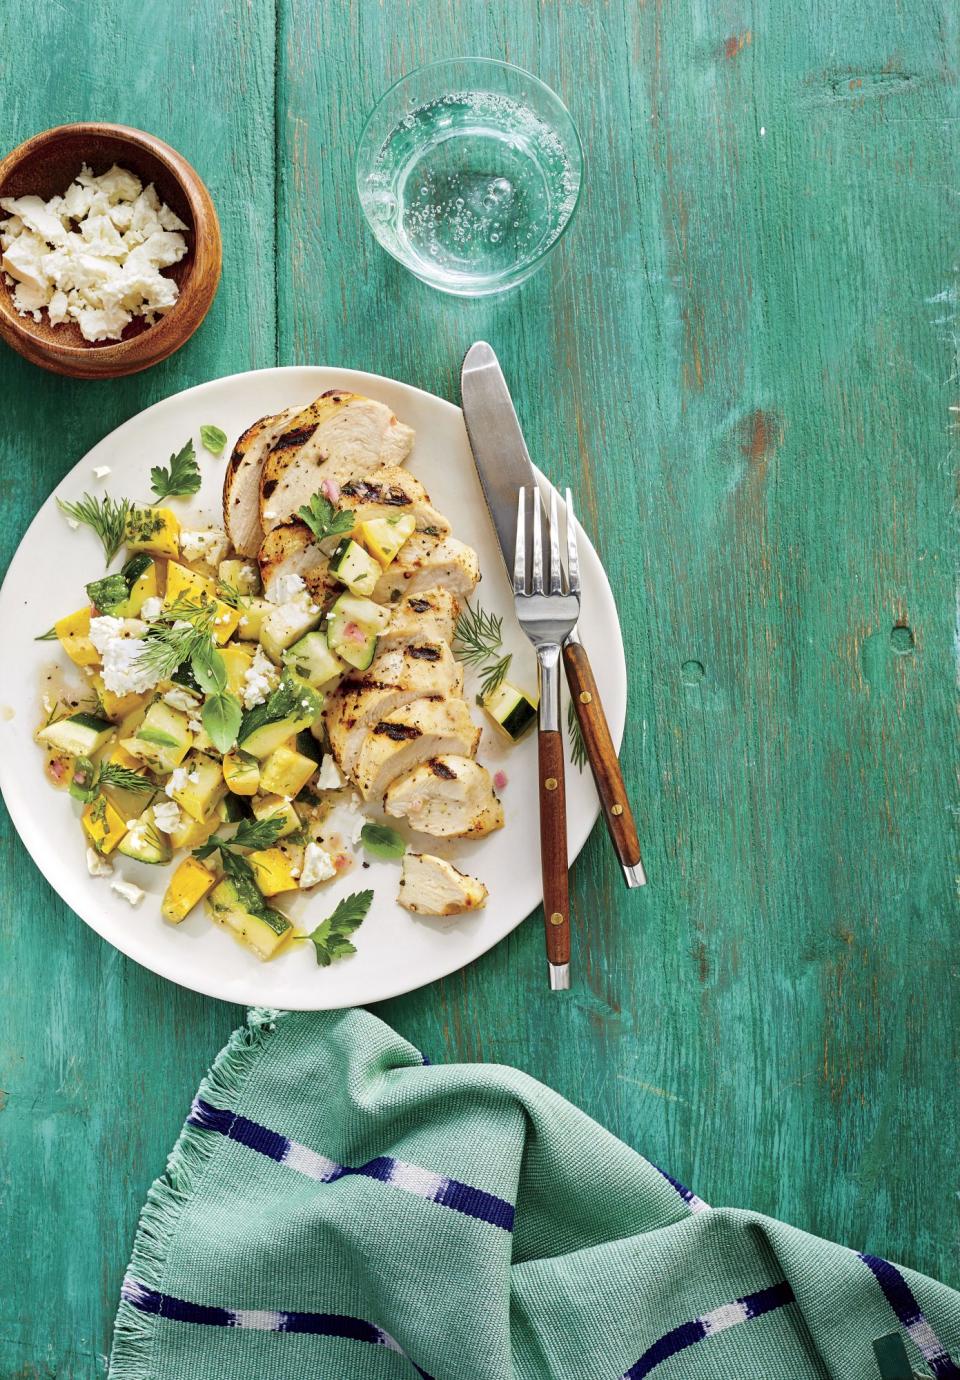 Grilled Chicken with Quick-Pickled Squash Salad